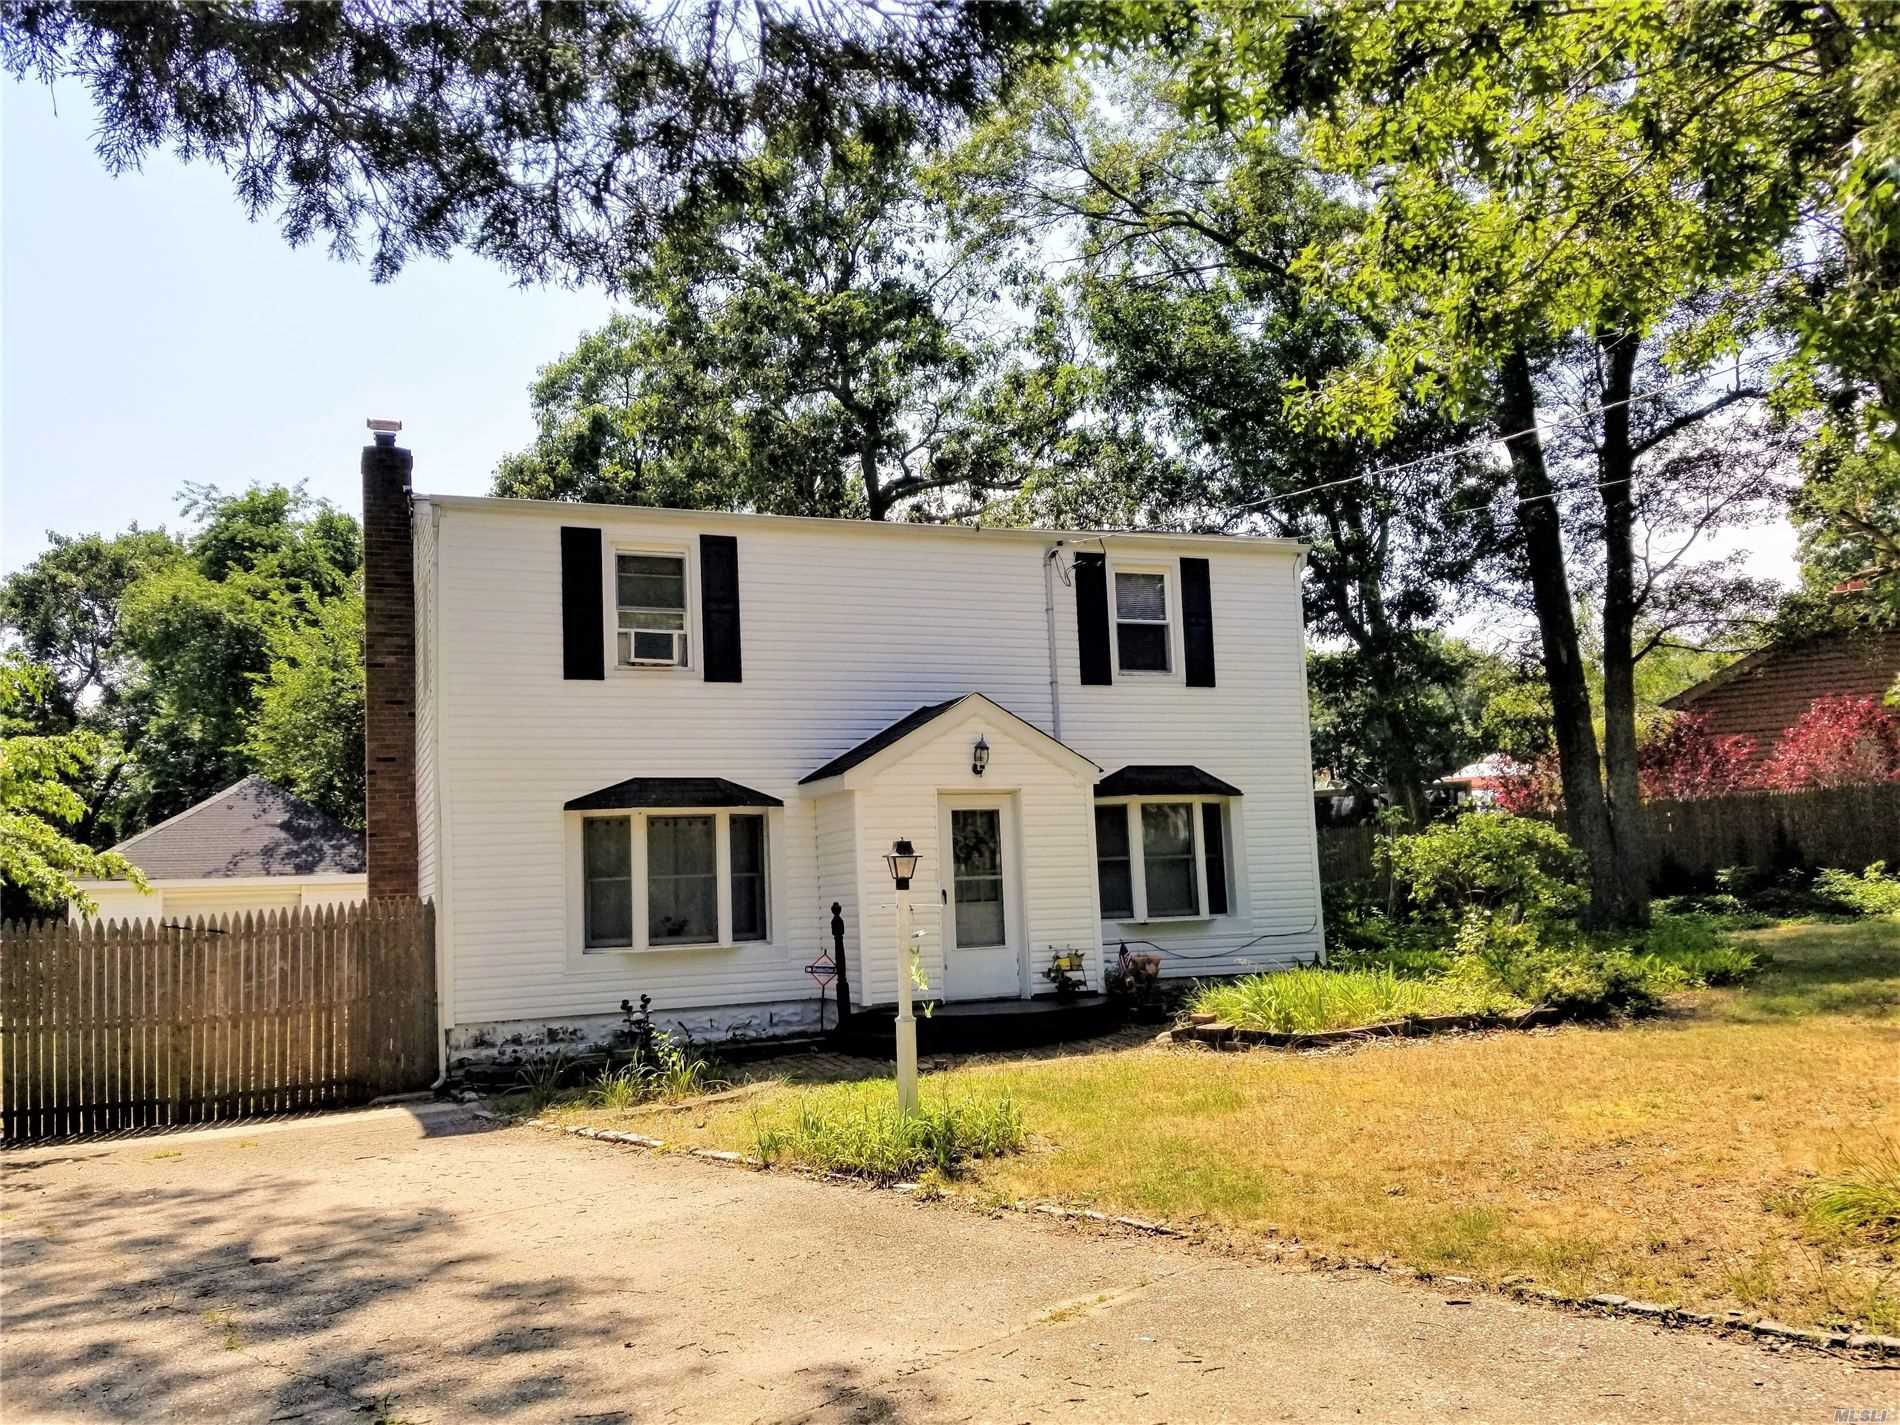 Spacious 4 bedroom colonial, features 2 bay windows, remodeled bathroom, new washer, 1 year old gas burner and hot water heater, 3 AC&rsquo;s, ceiling fans, vinyl siding, detached over-sized 1.5 car garage on a large property.